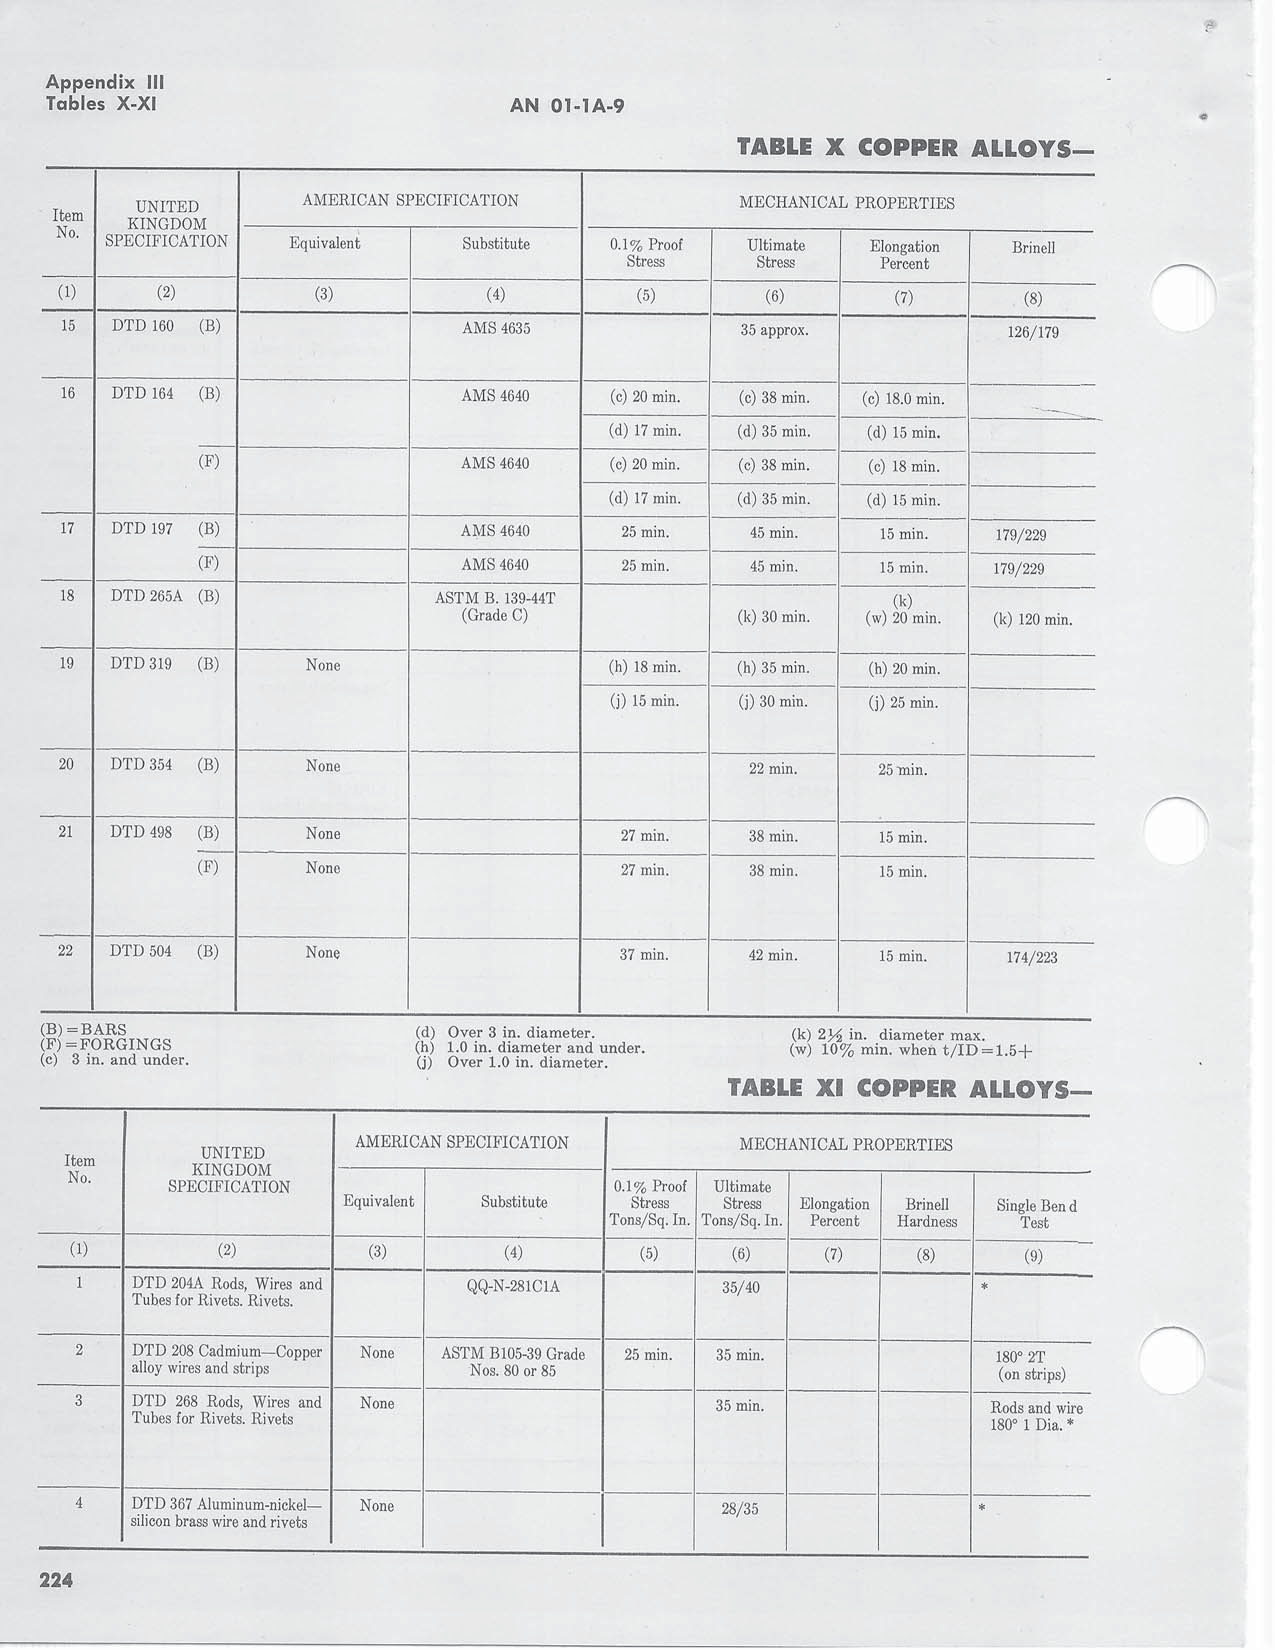 Sample page 226 from AirCorps Library document: General Manual for Aircraft Metals